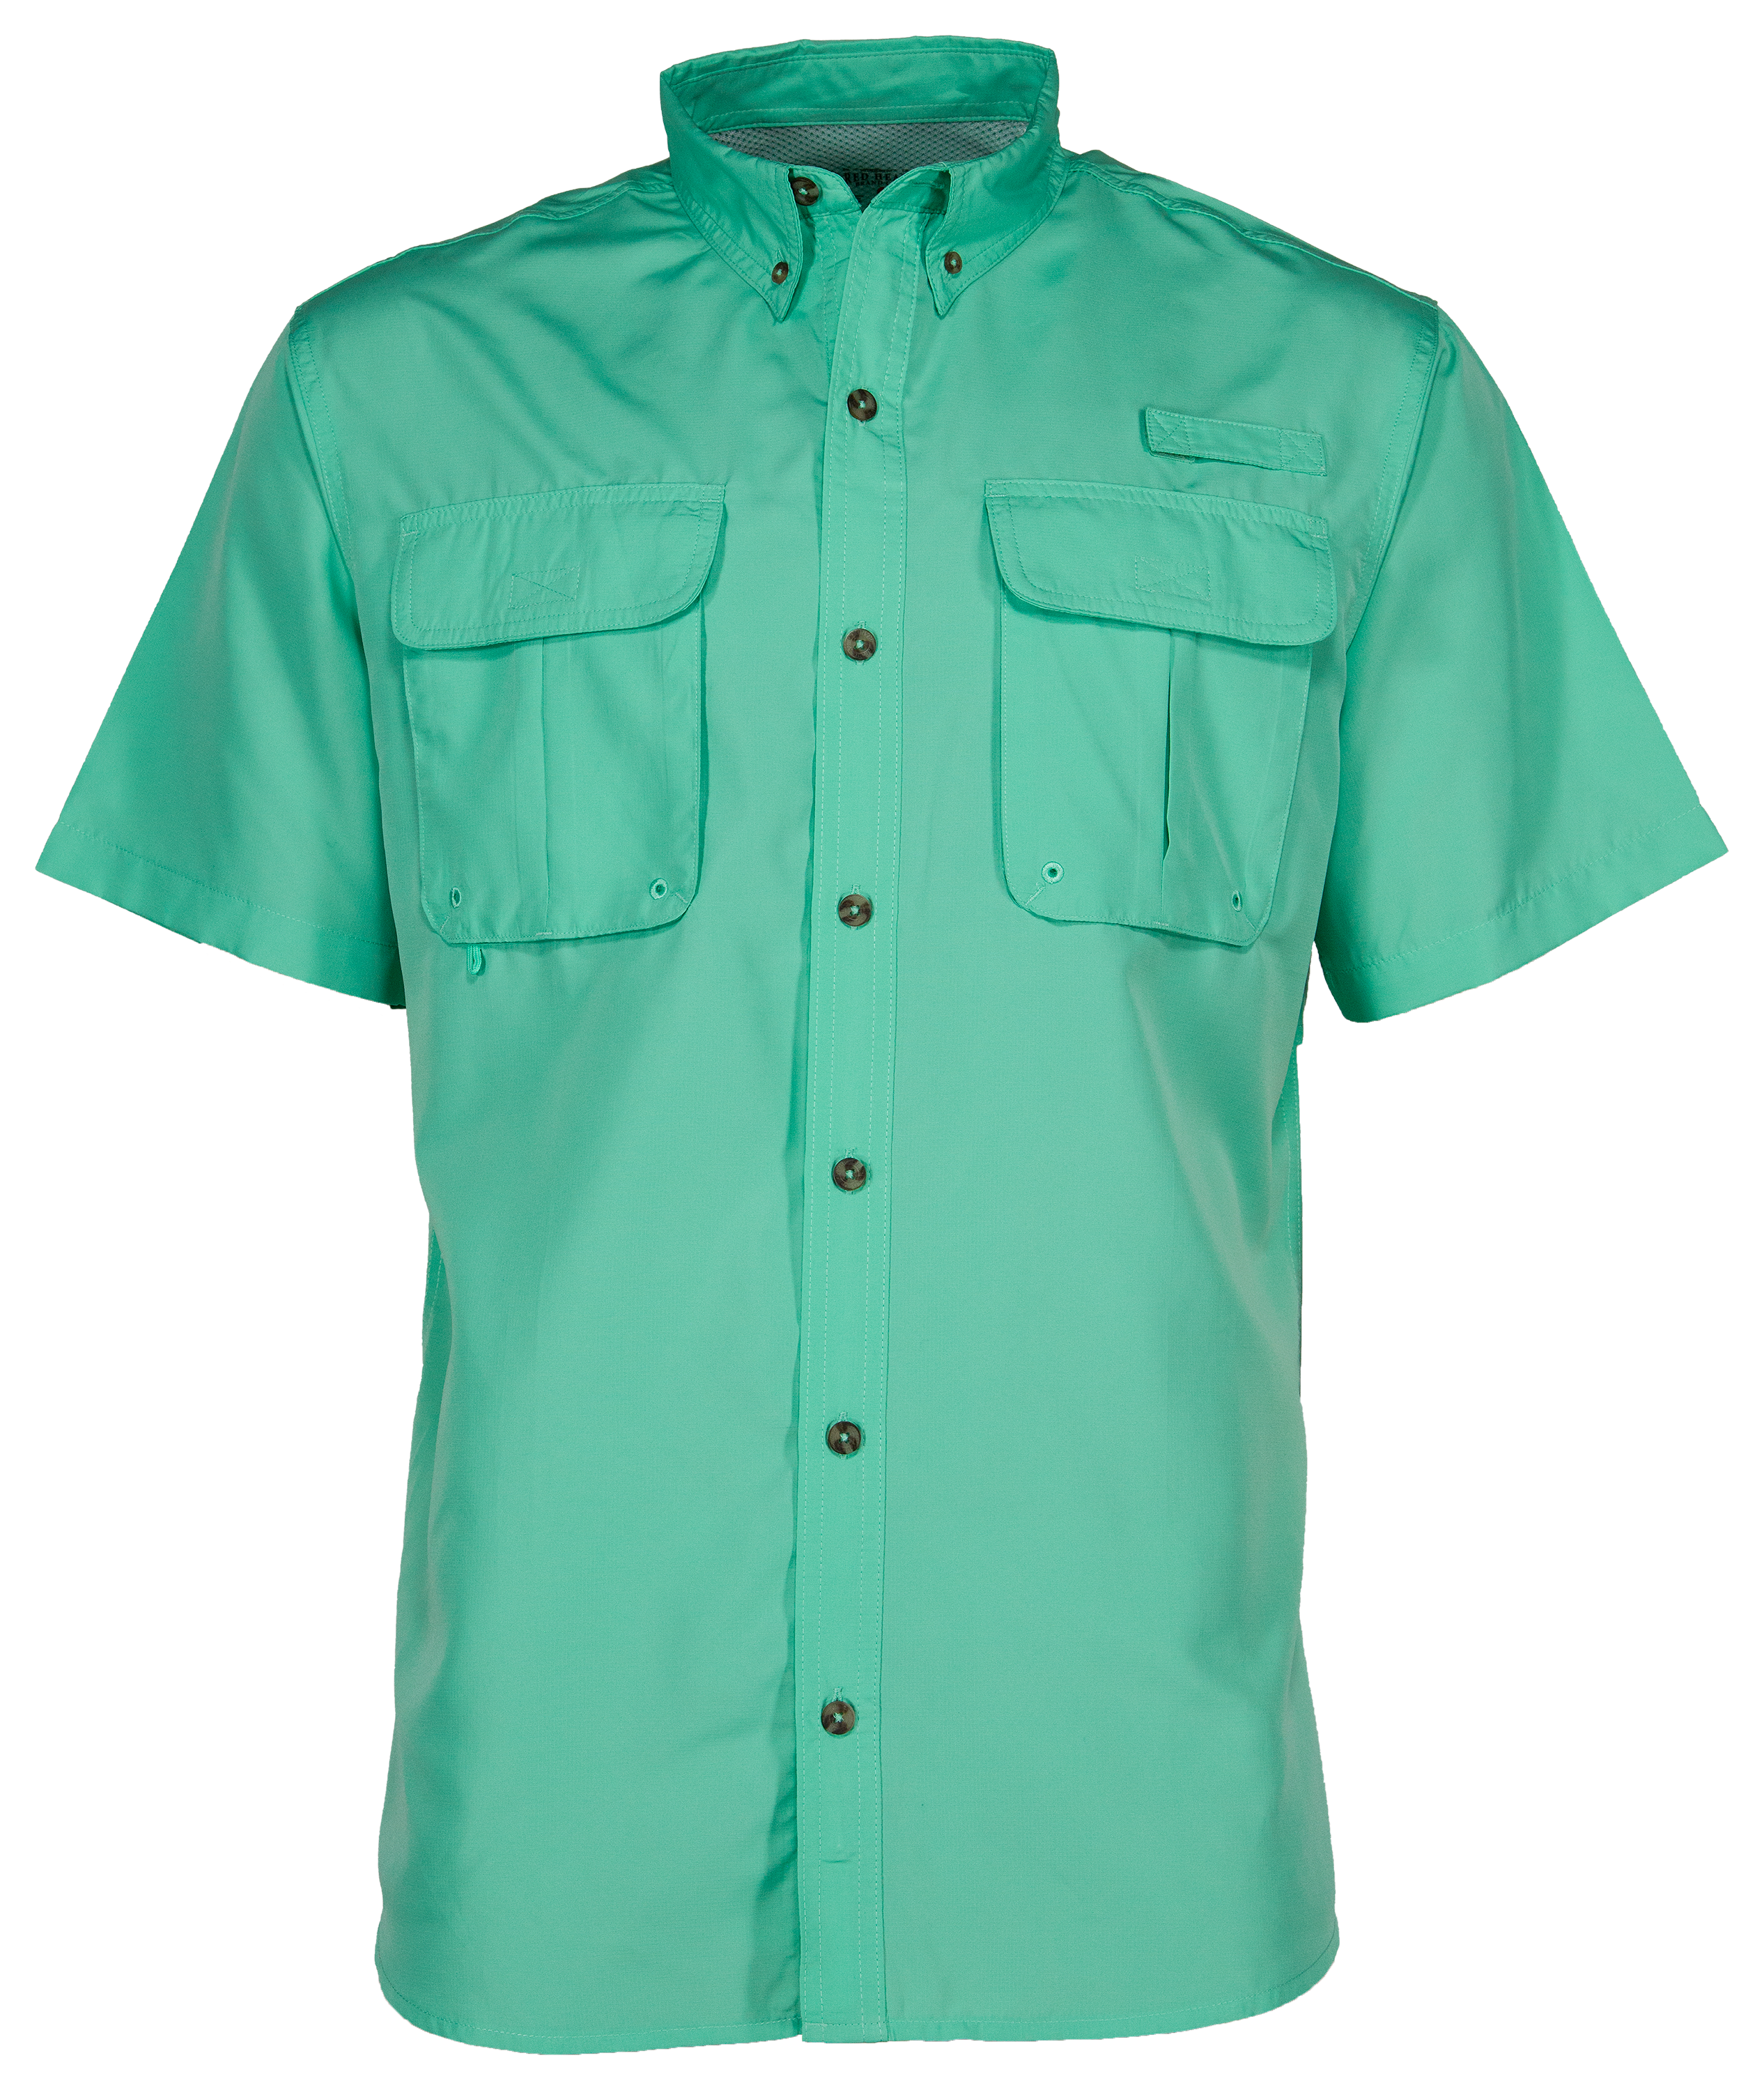 RedHead Solid Tourney Short-Sleeve Shirt for Men